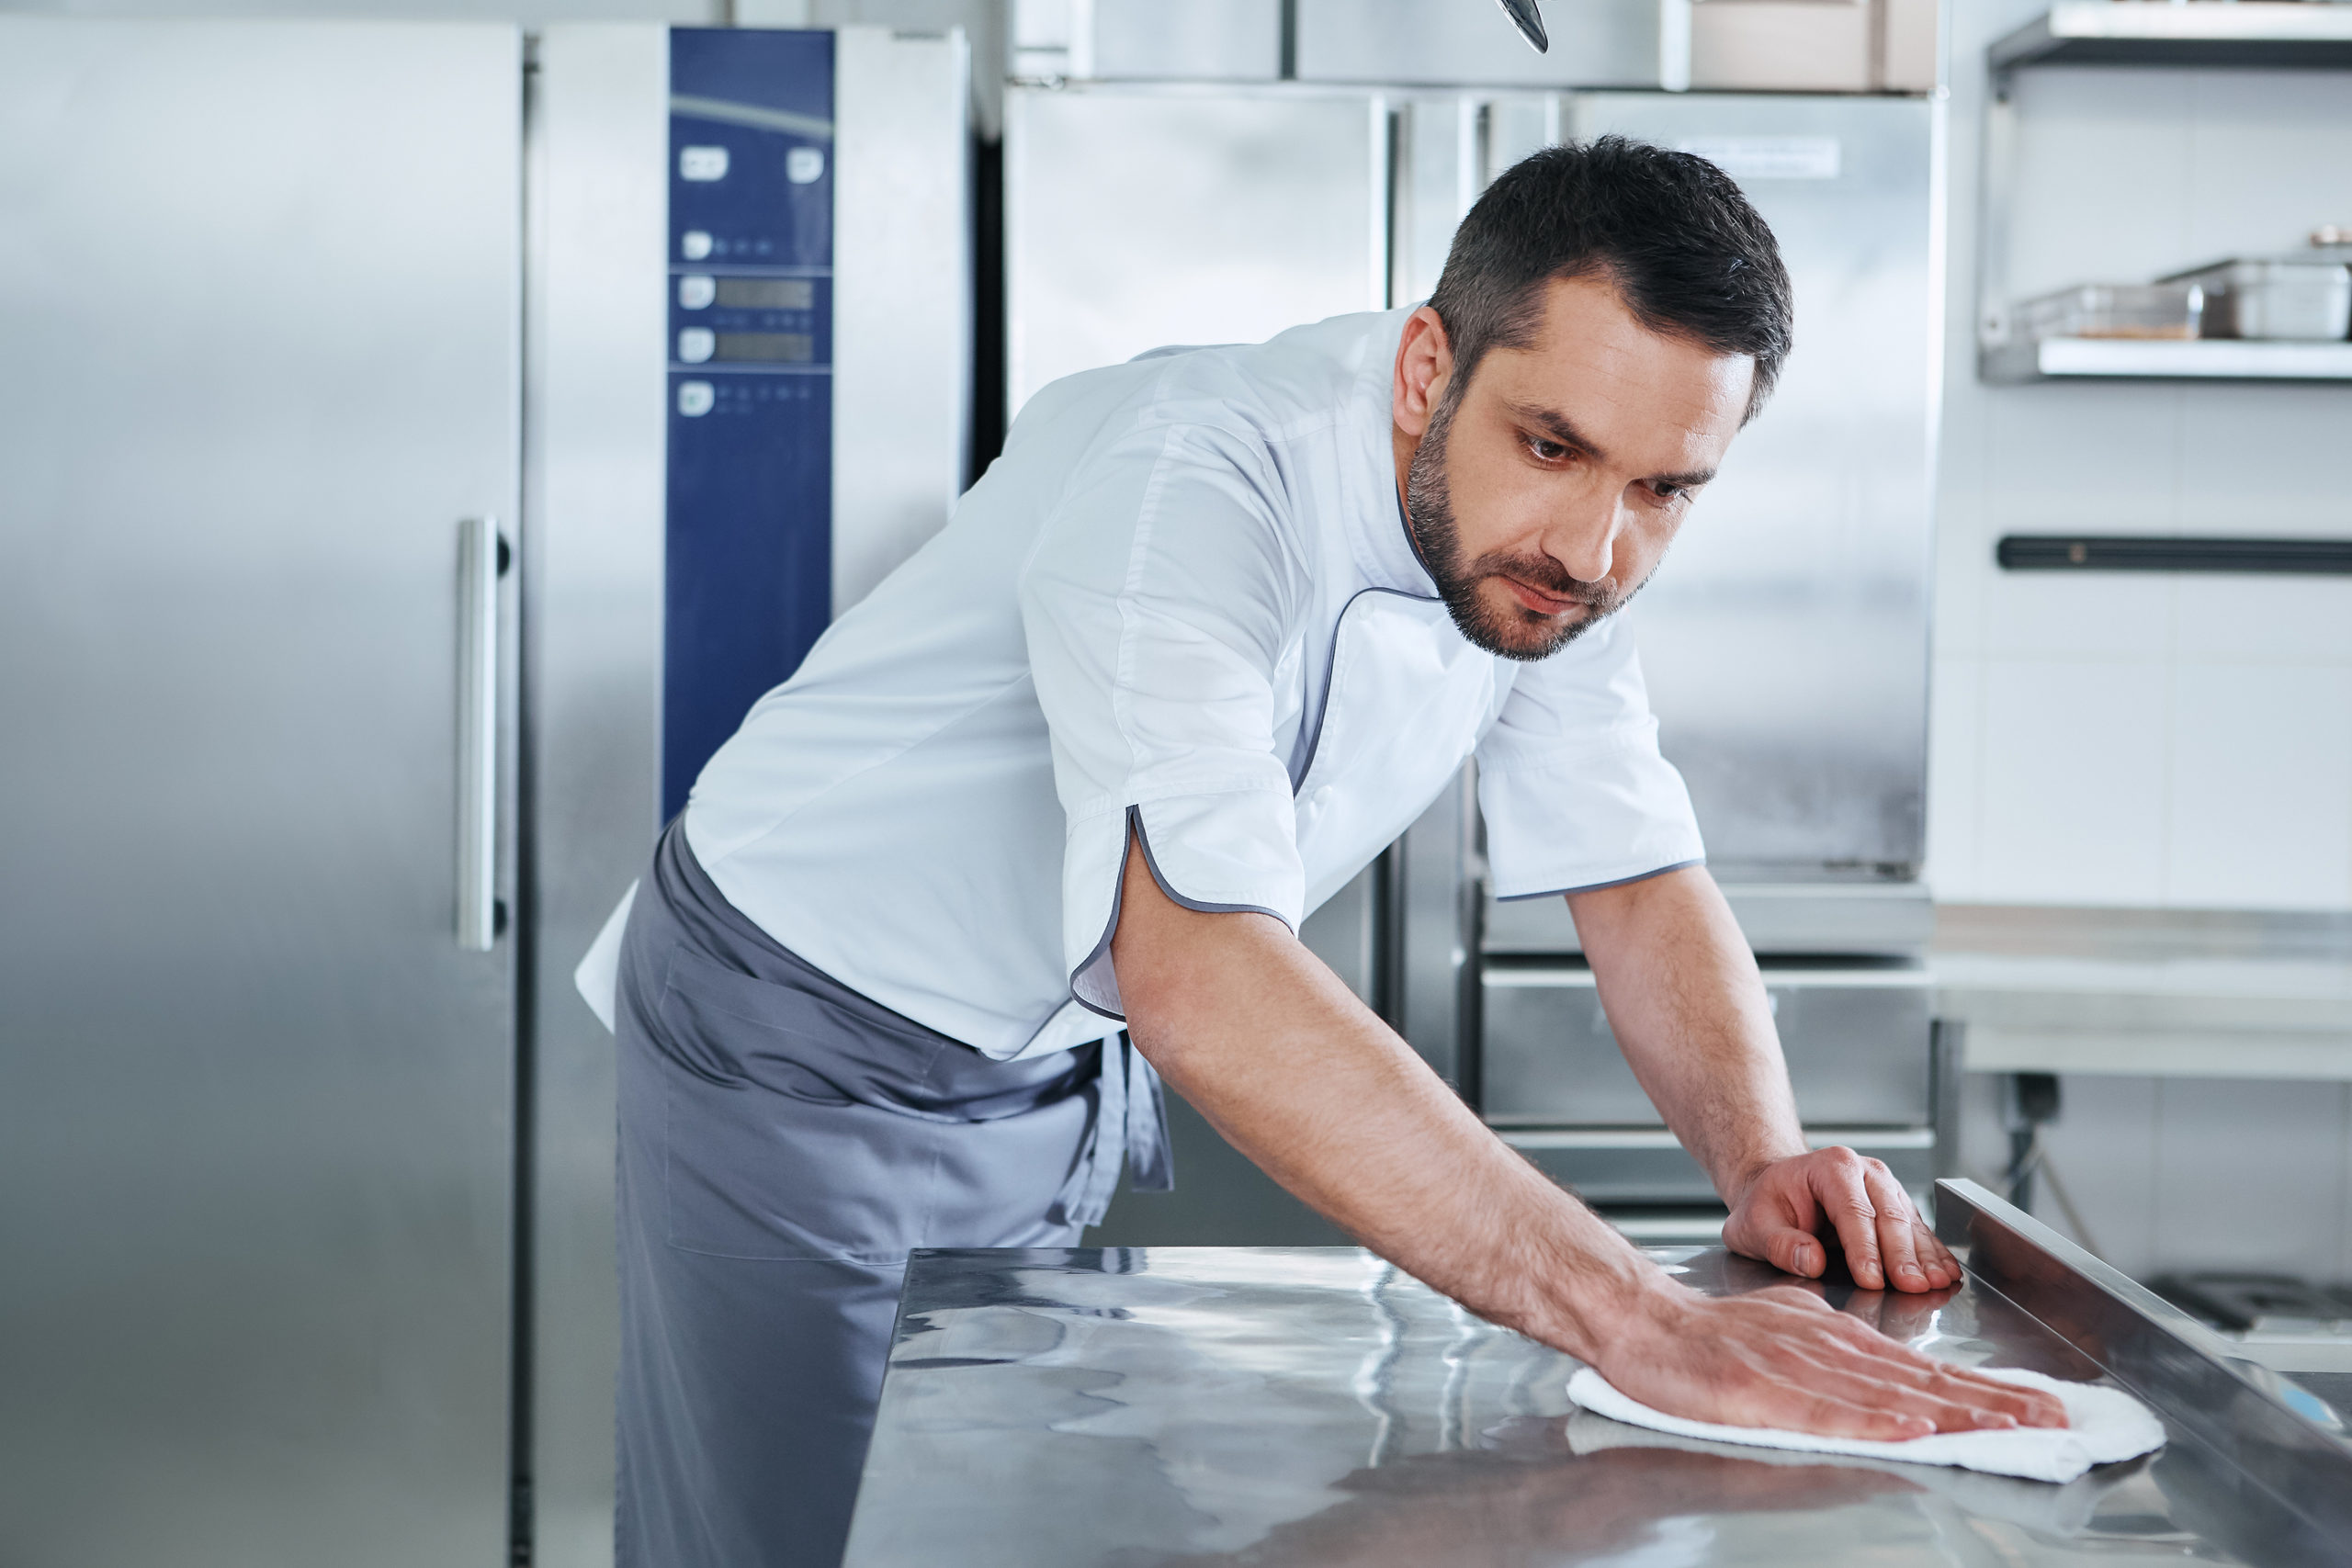 Commercial Kitchen Cleaning Service Scaled 